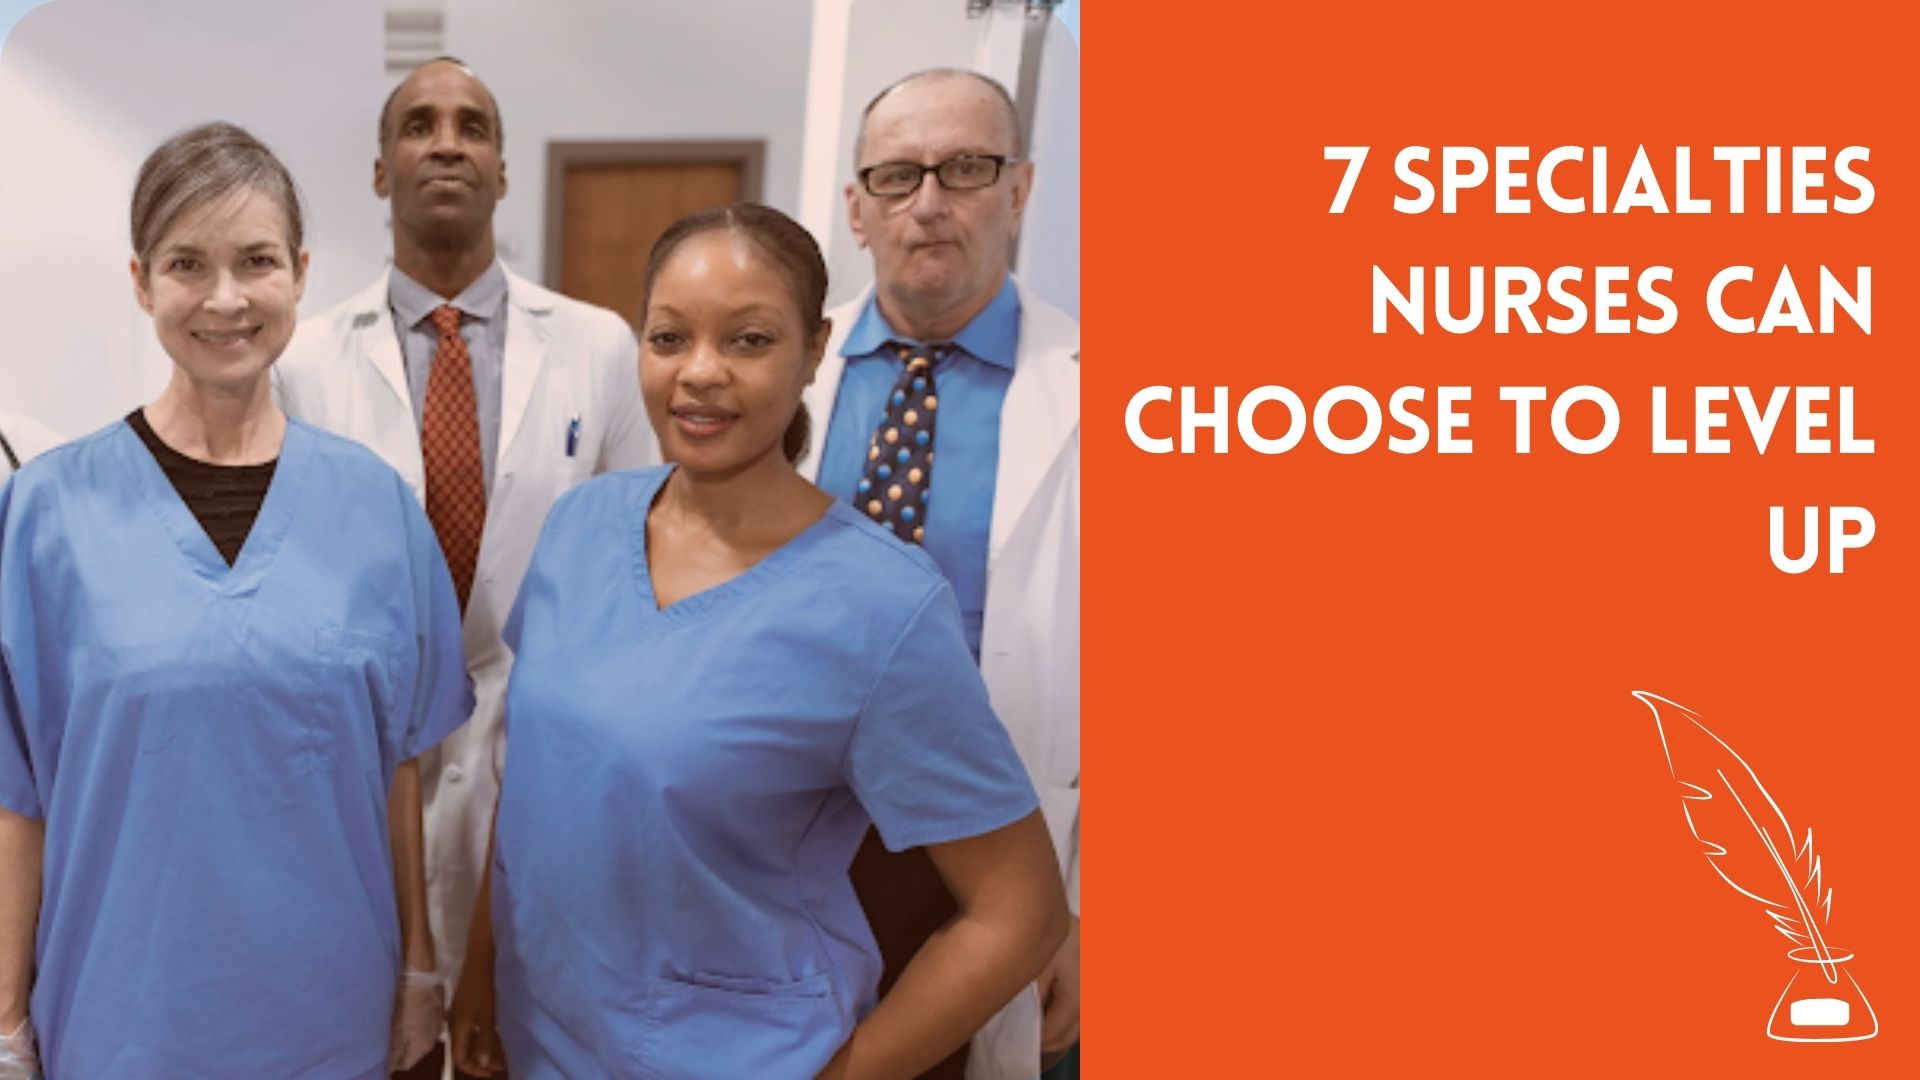 7 Specialties Nurses Can Choose to Level Up